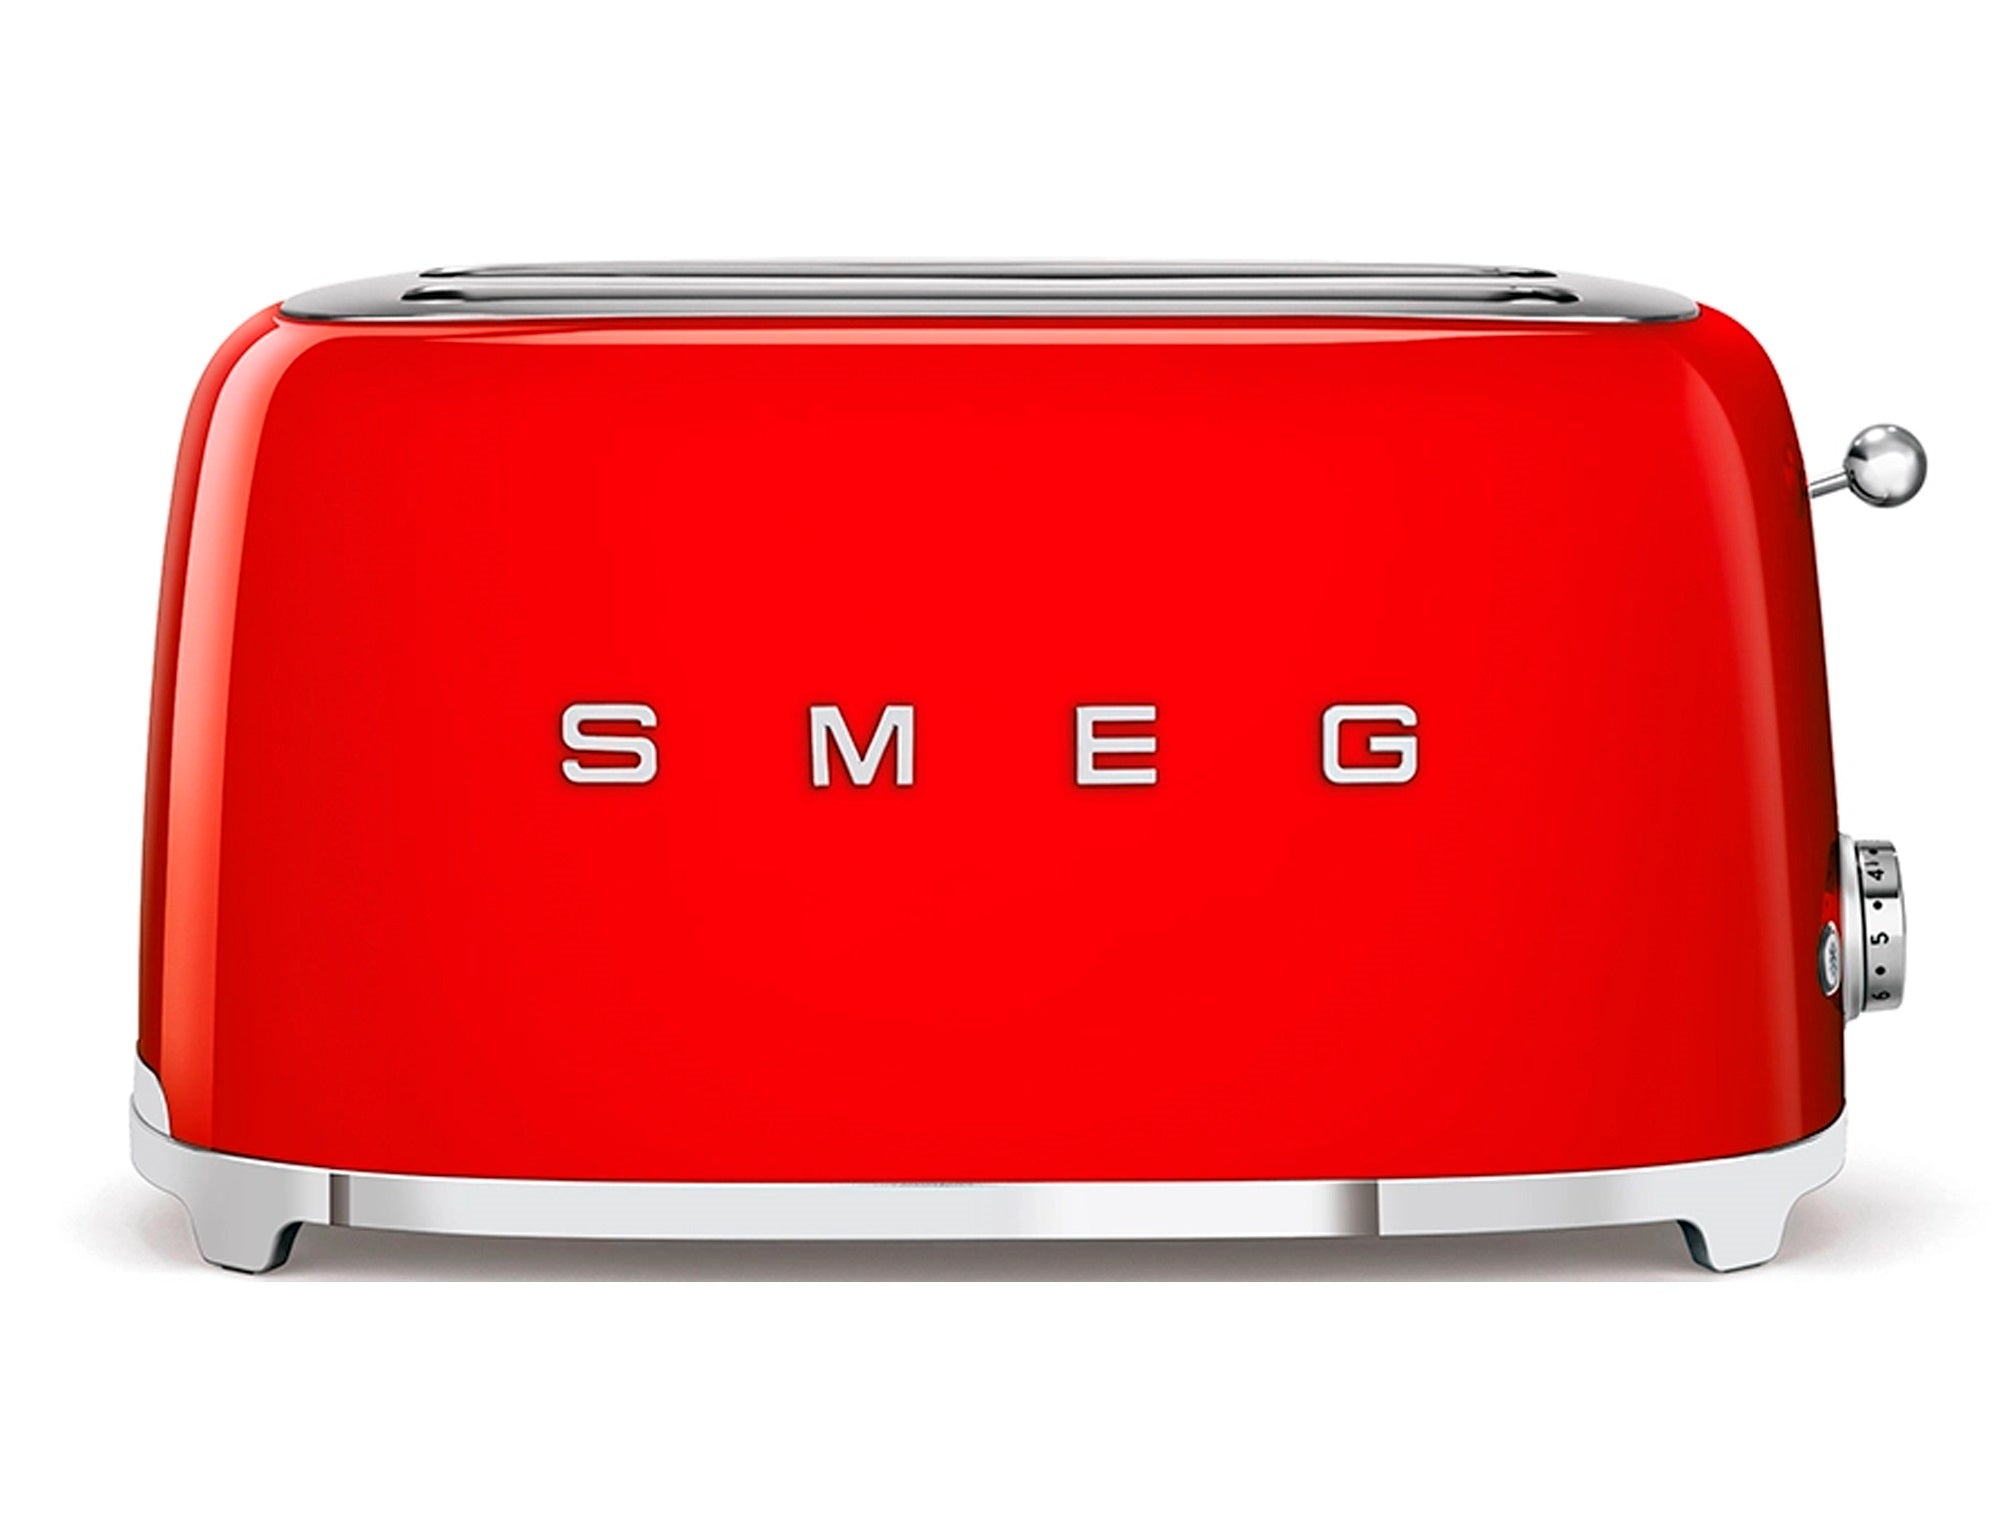 Smeg Toaster extra-wide 50's Style Aesthetic